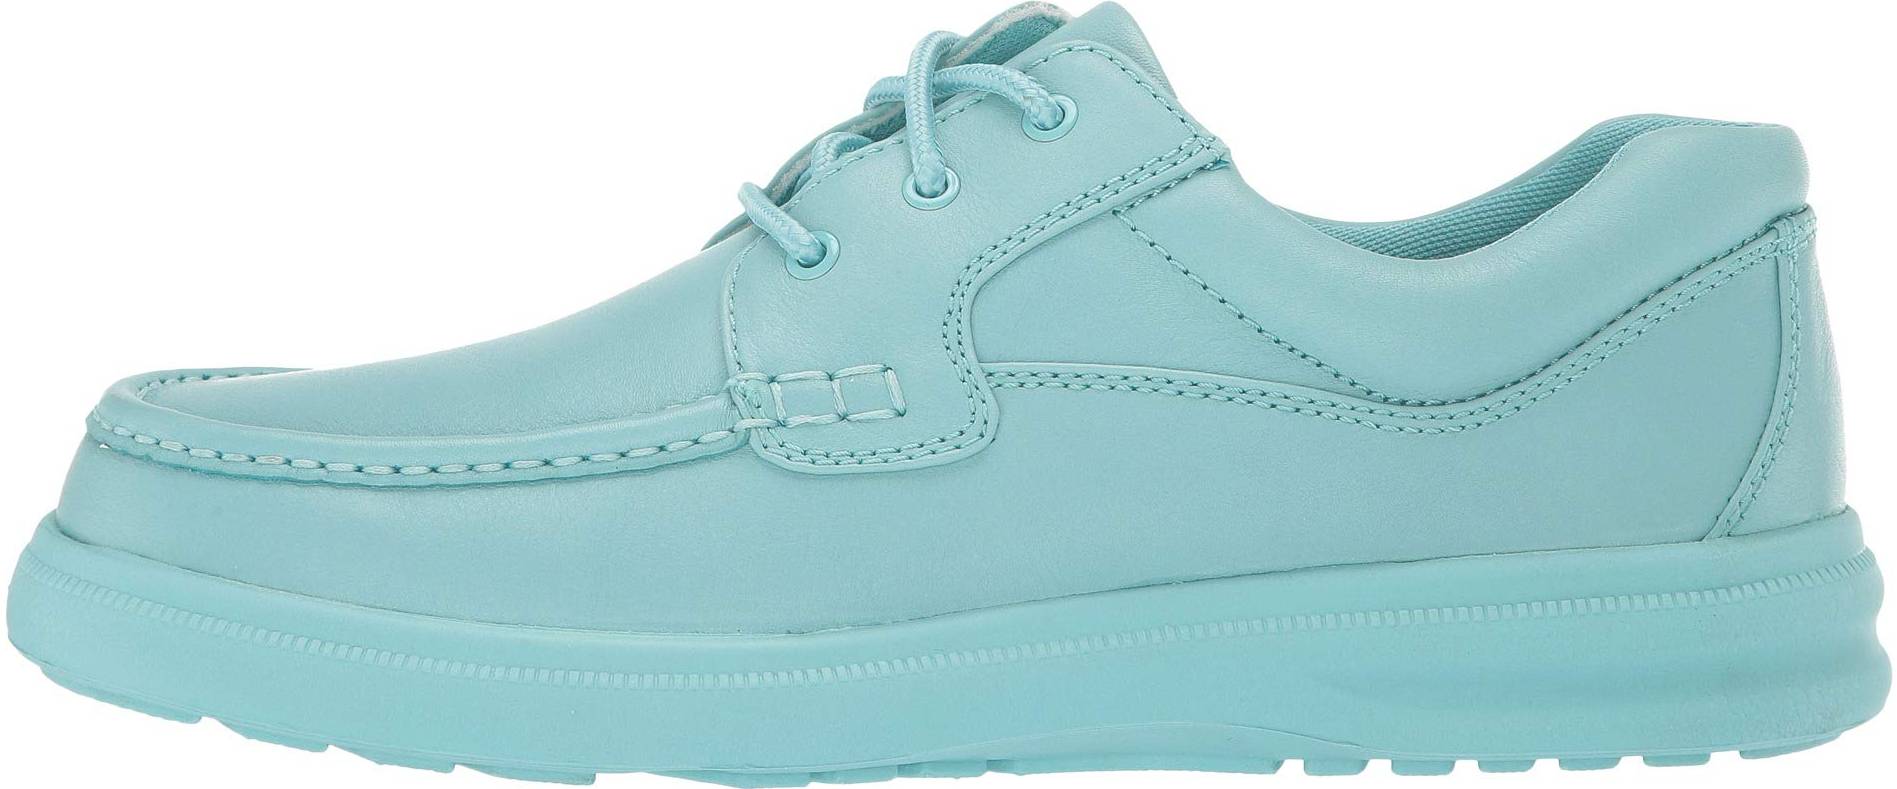 Smidighed vidnesbyrd Sprede Hush Puppies Gus sneakers (only $32) | RunRepeat